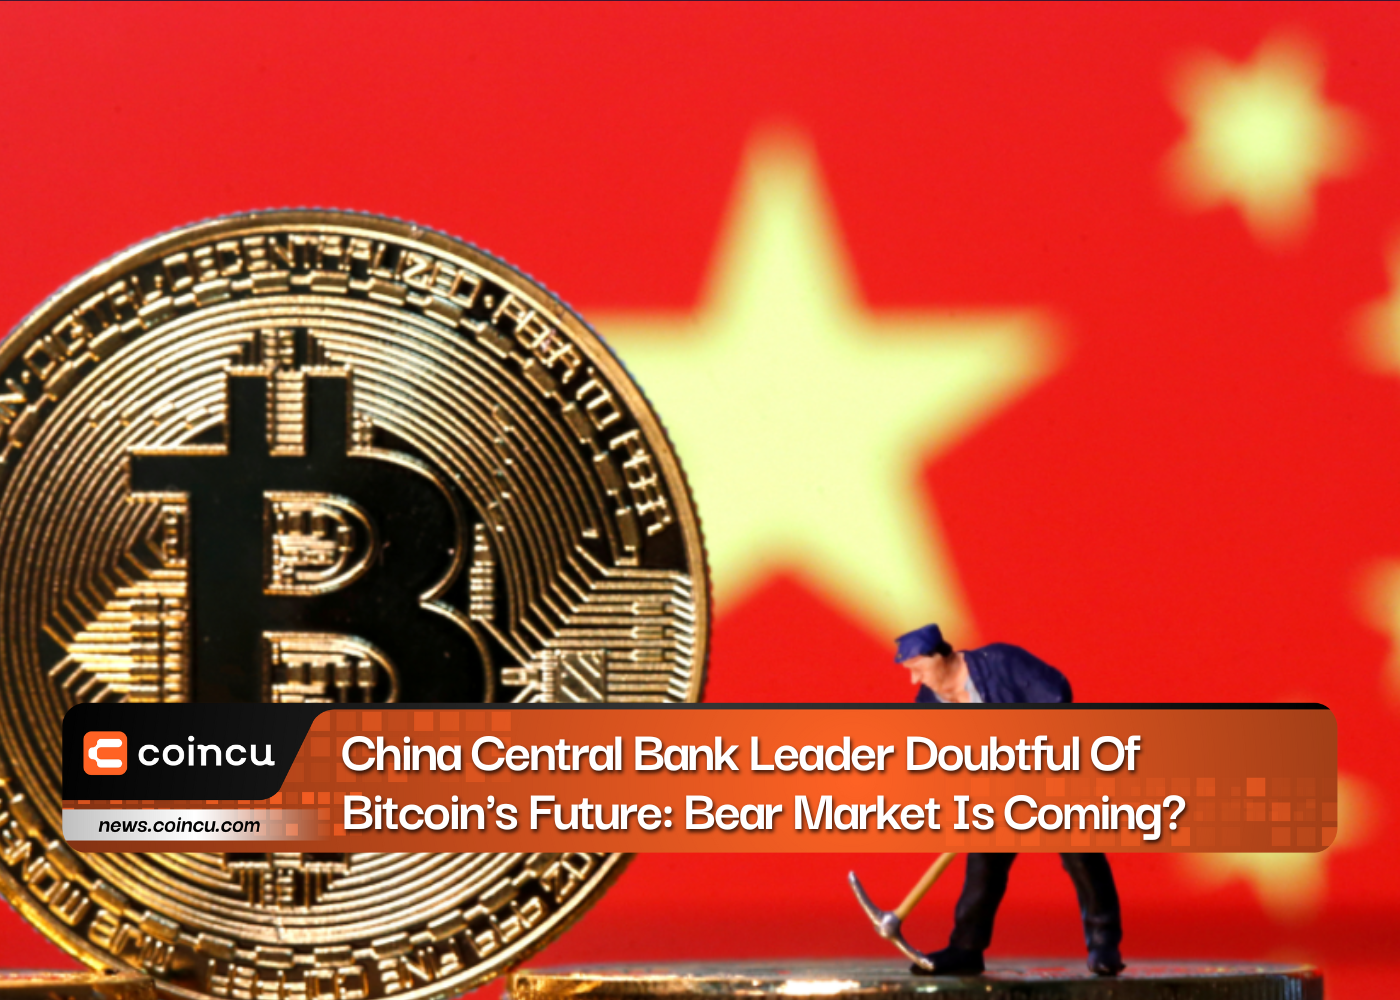 China Central Bank Leader Doubtful Of Bitcoin's Future: Bear Market Is Coming?